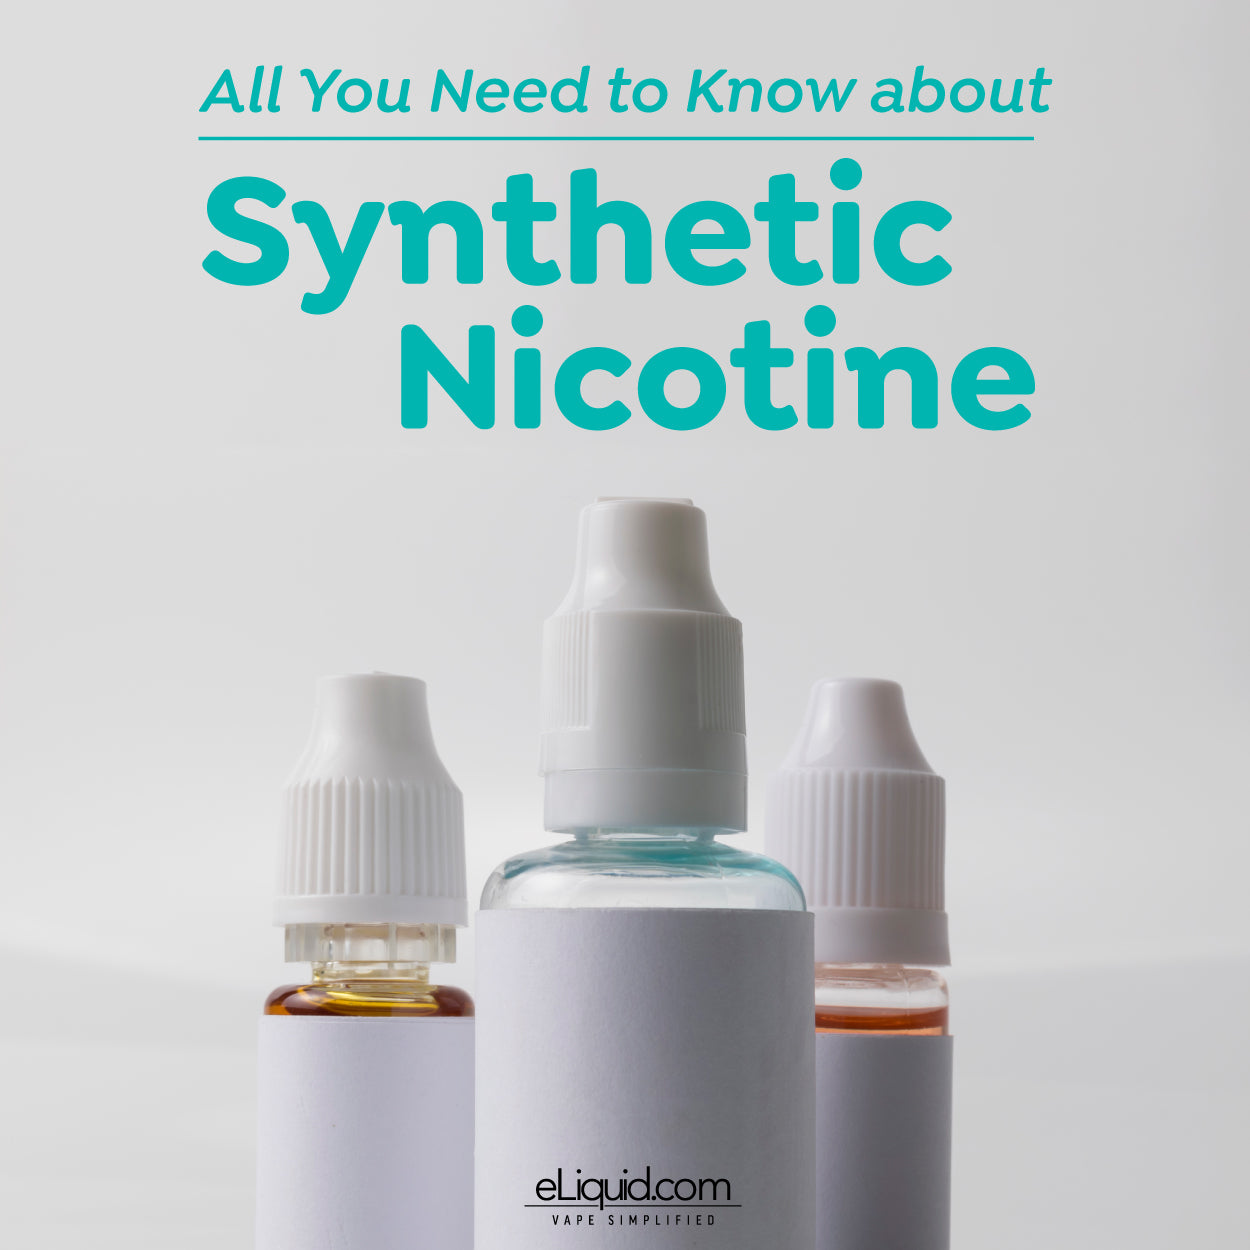 Synthetic Nicotine: This Is All You Need to Know